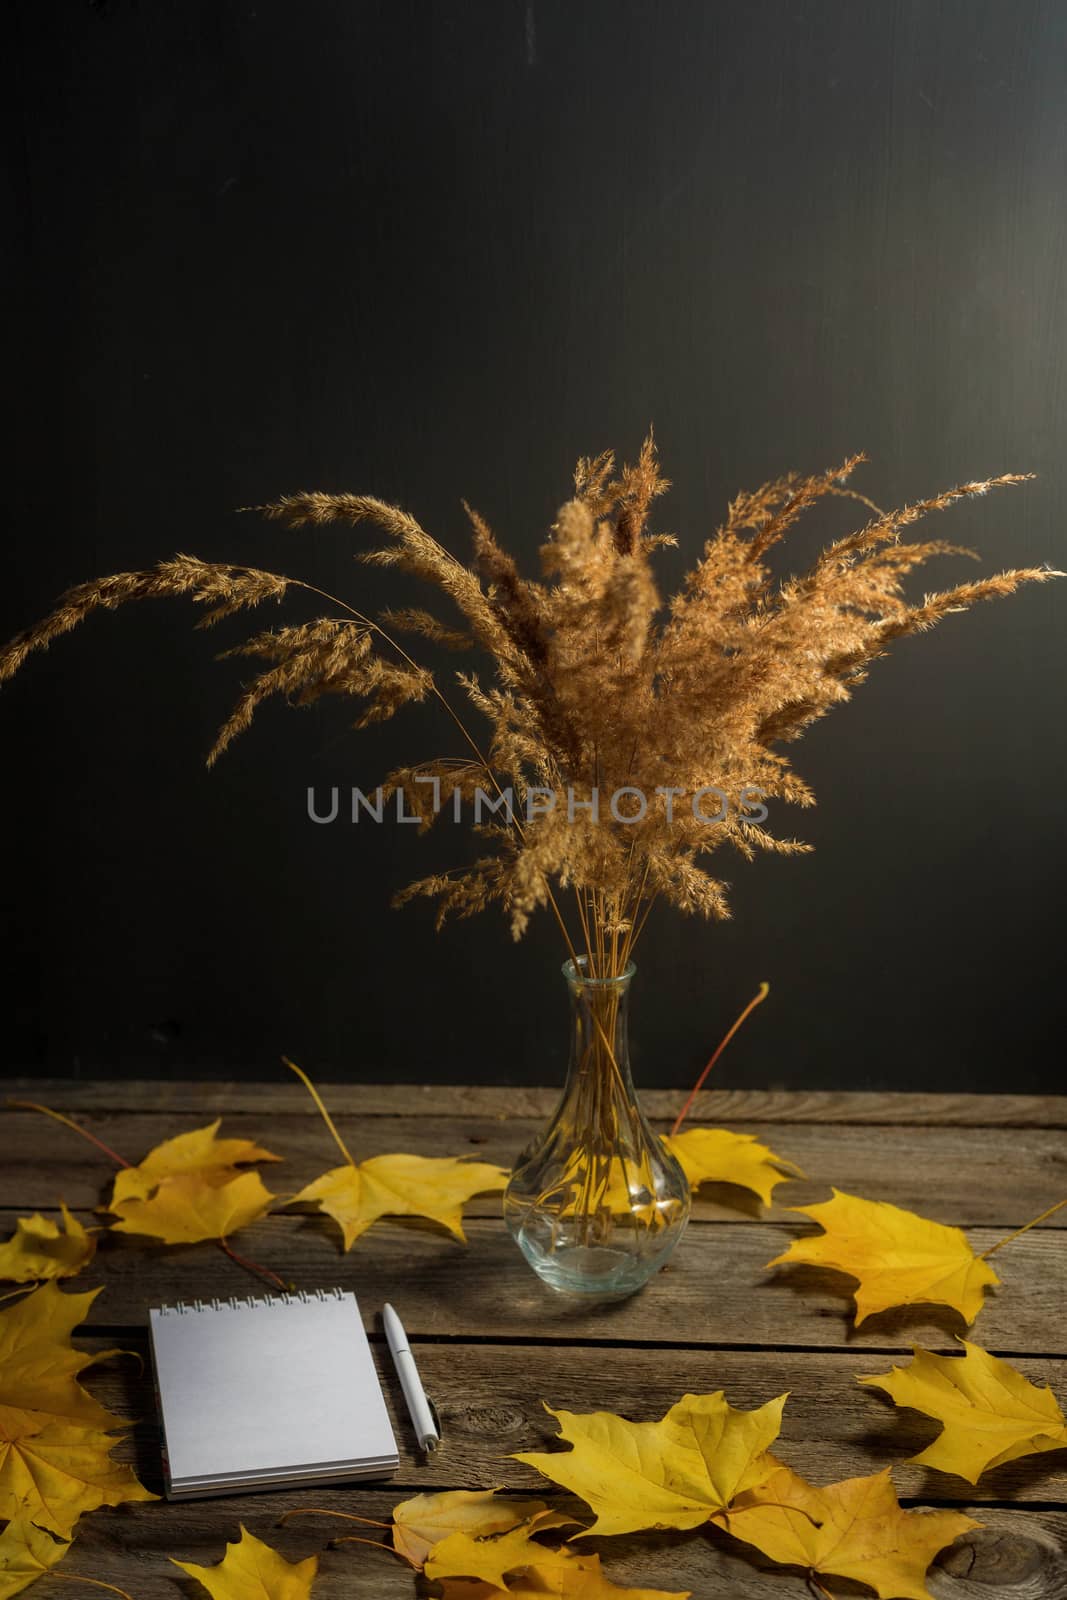 .Still life of autumn fallen leaves and office supplies on a wooden background.